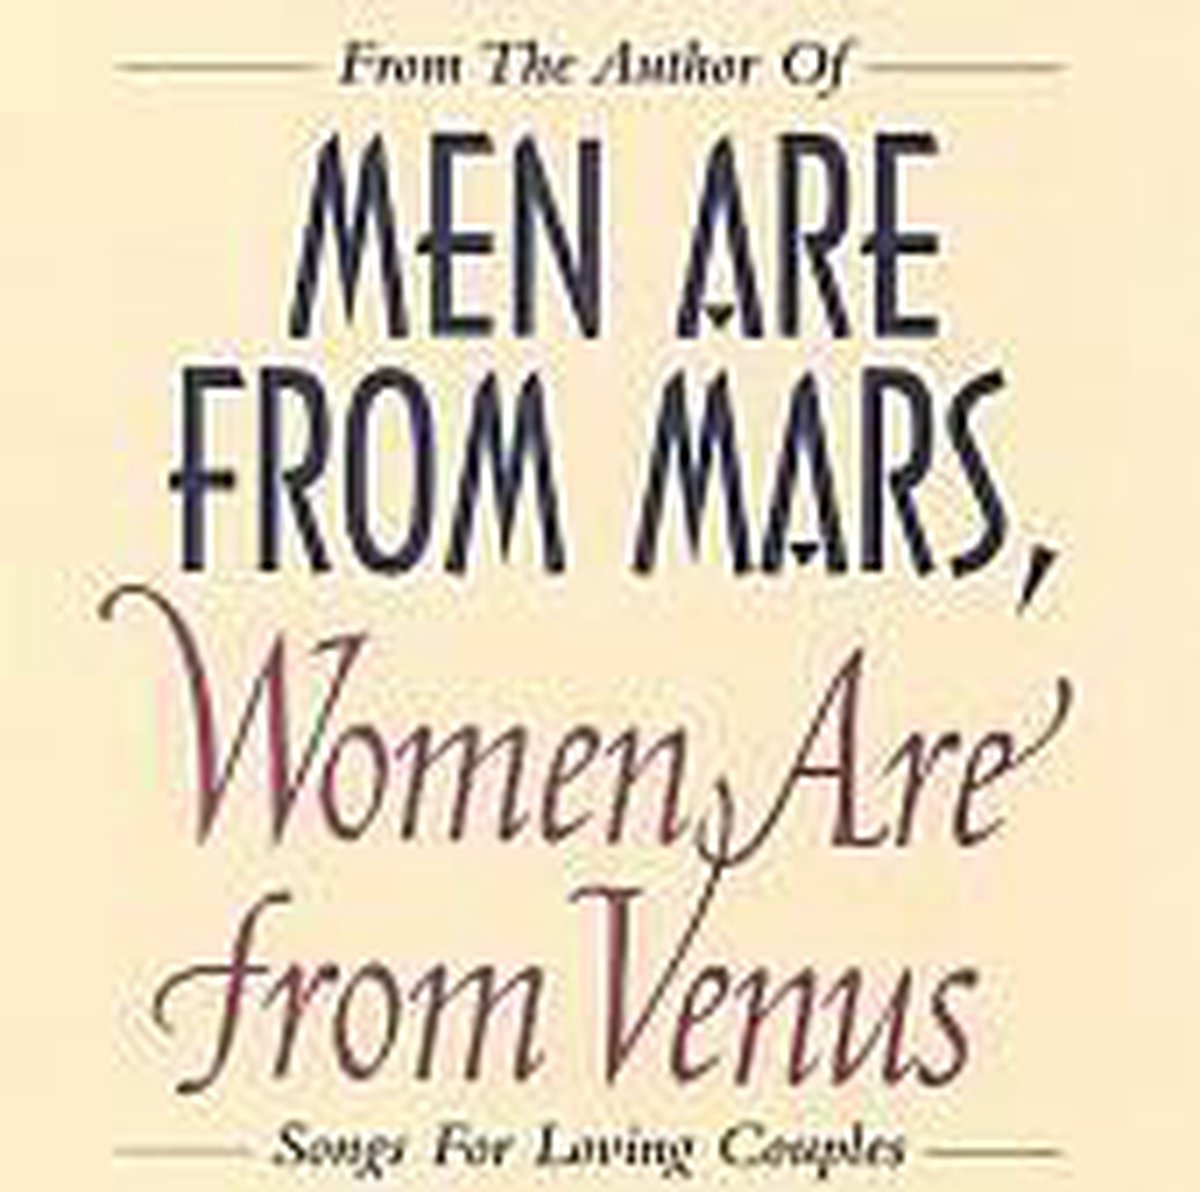 Men Are from Mars, Women Are from Venus - various artists